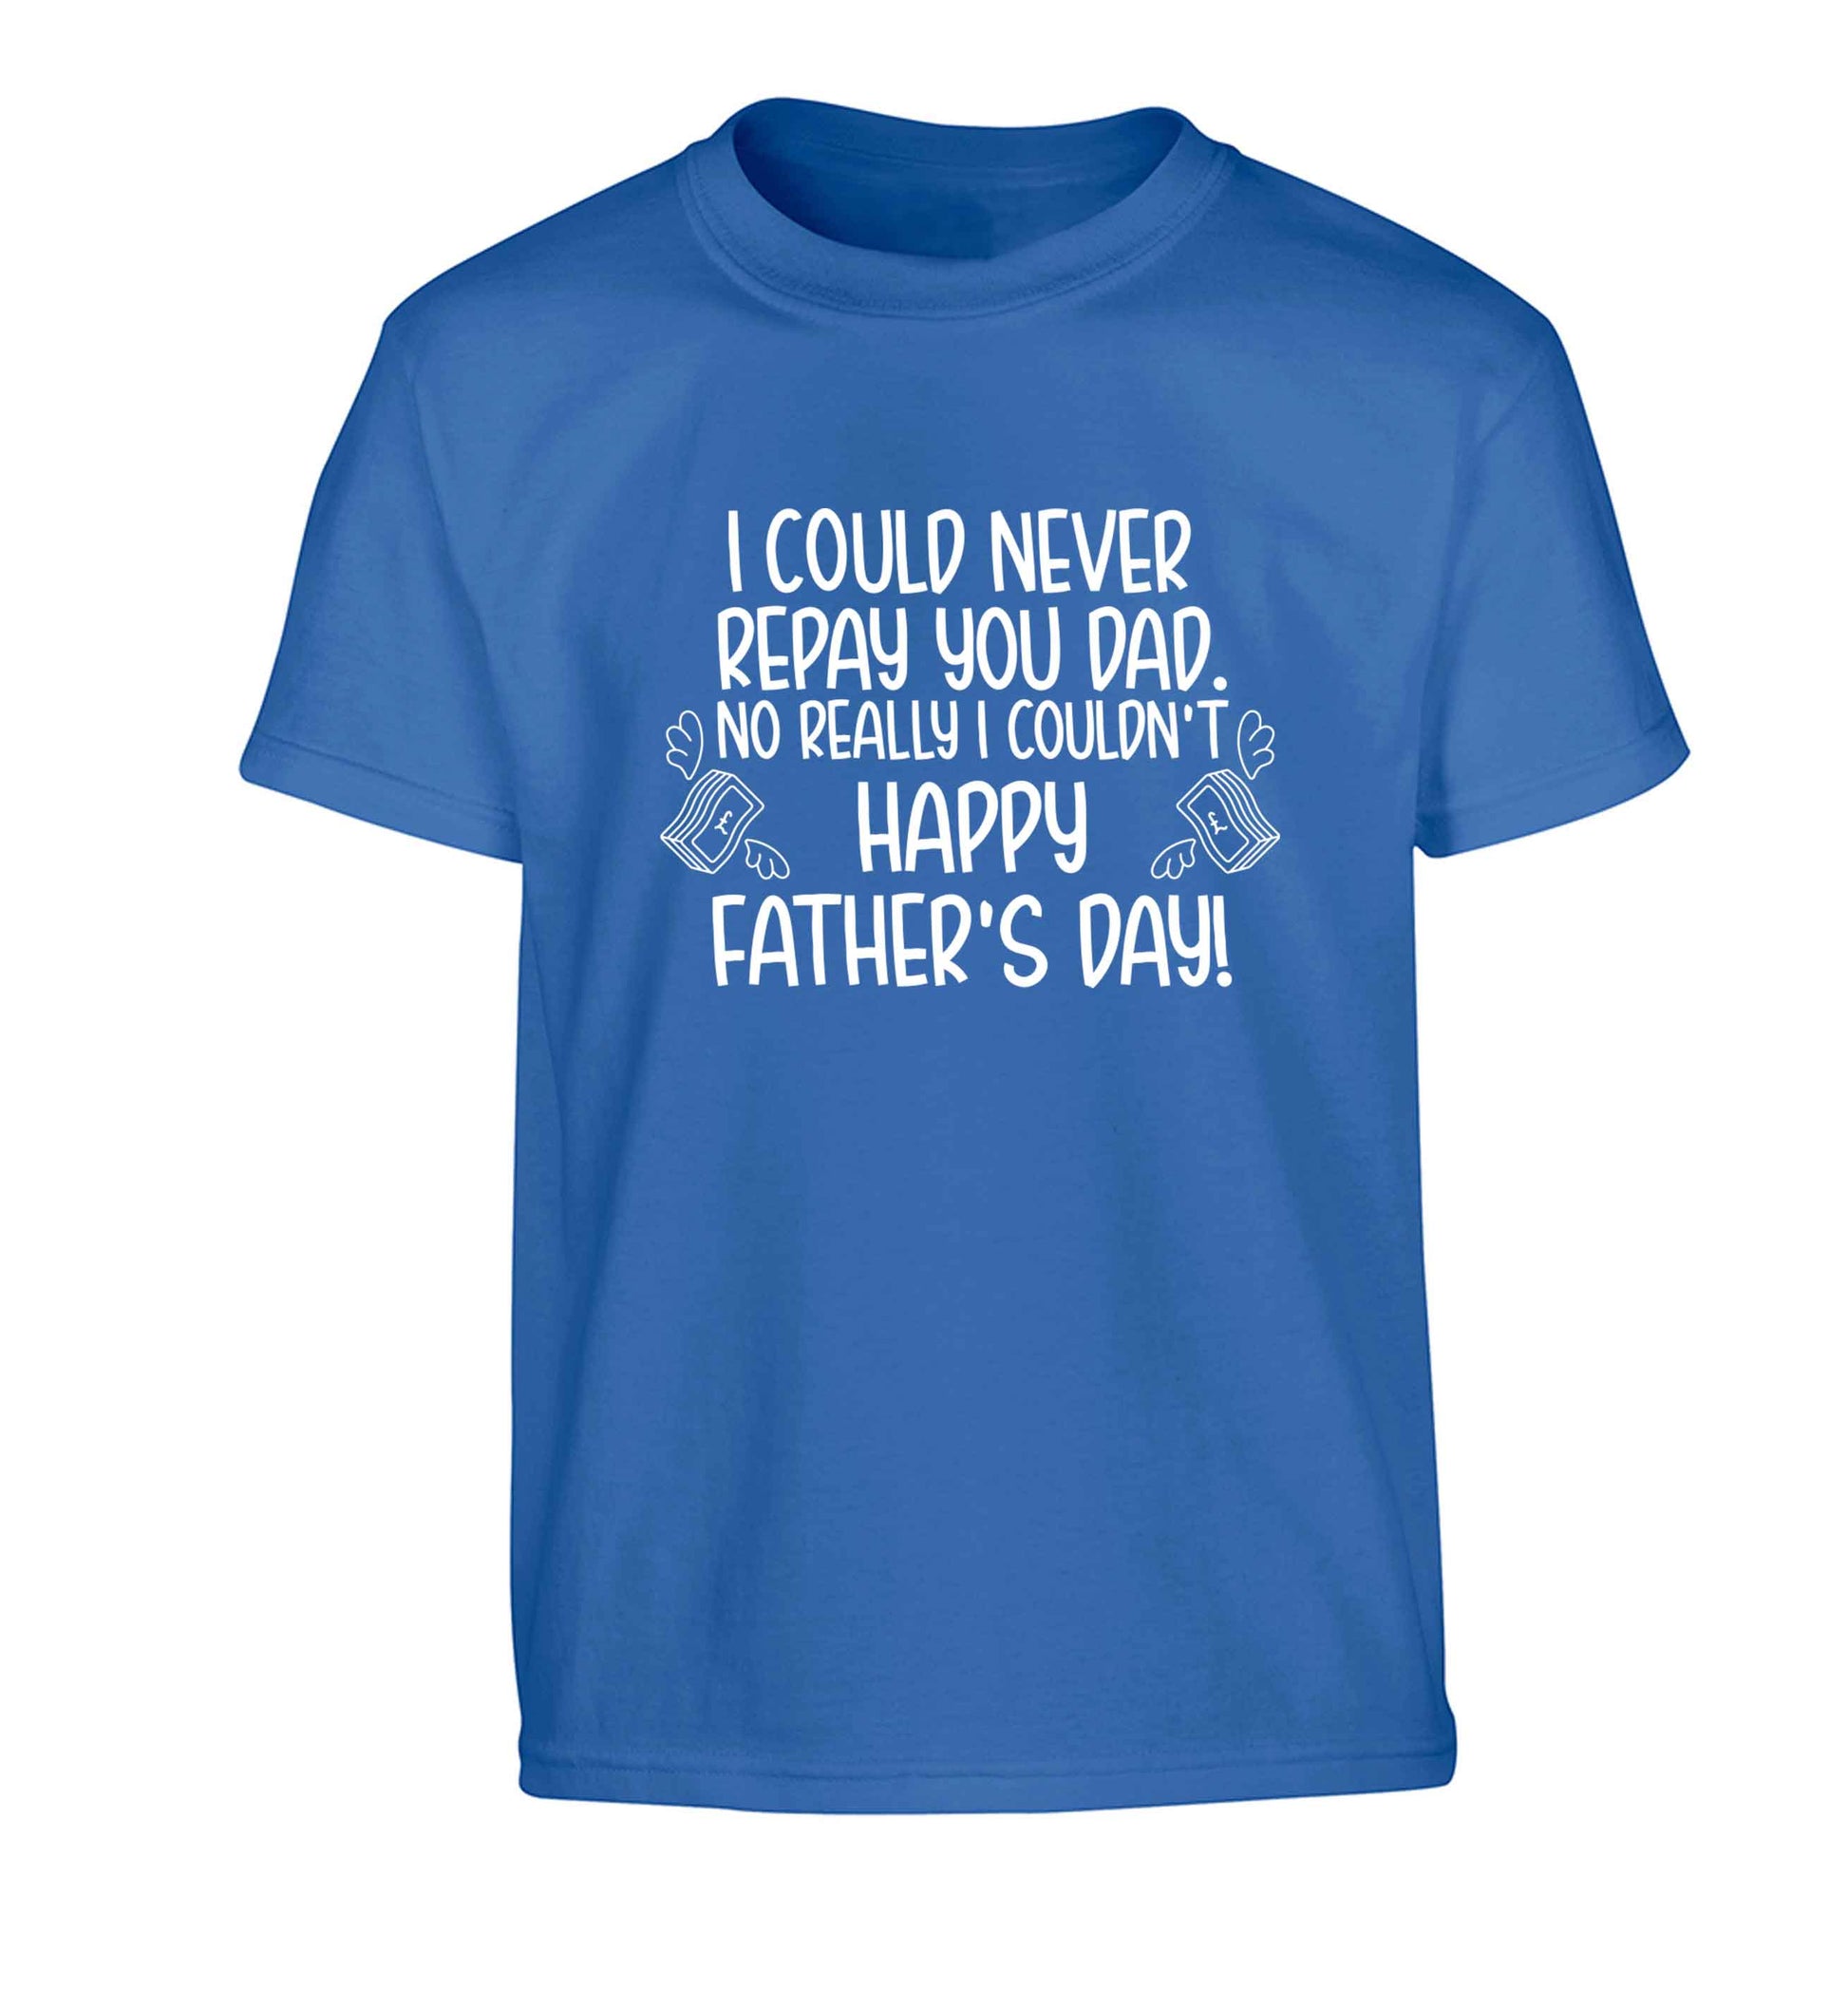 I could never repay you dad. No I really couldn't happy Father's day! Children's blue Tshirt 12-13 Years